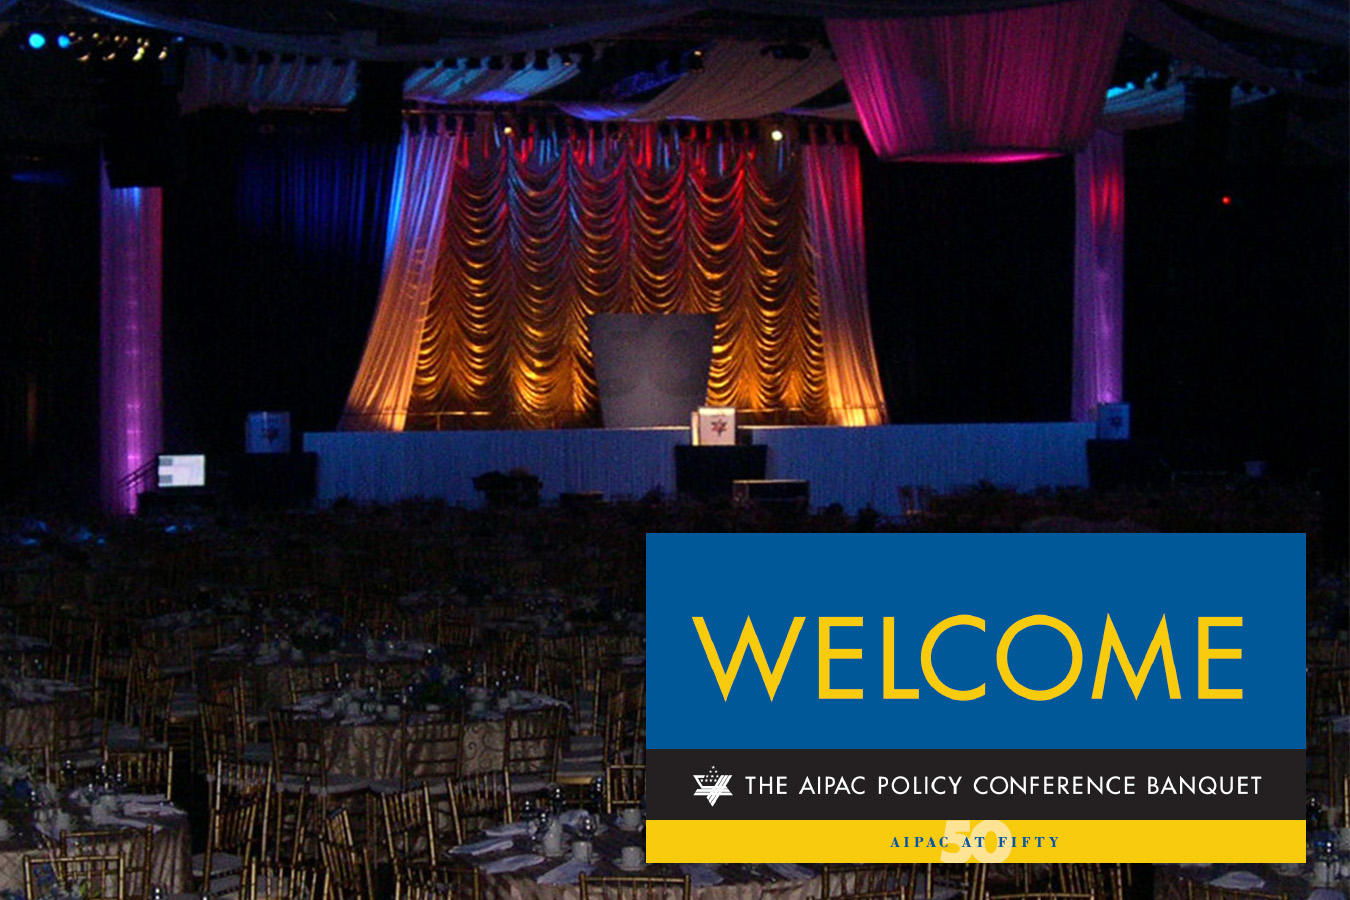 Aipac 50 1 : Bright signs coordinated with thematic decor were used to direct traffic flow of the 5000 guests